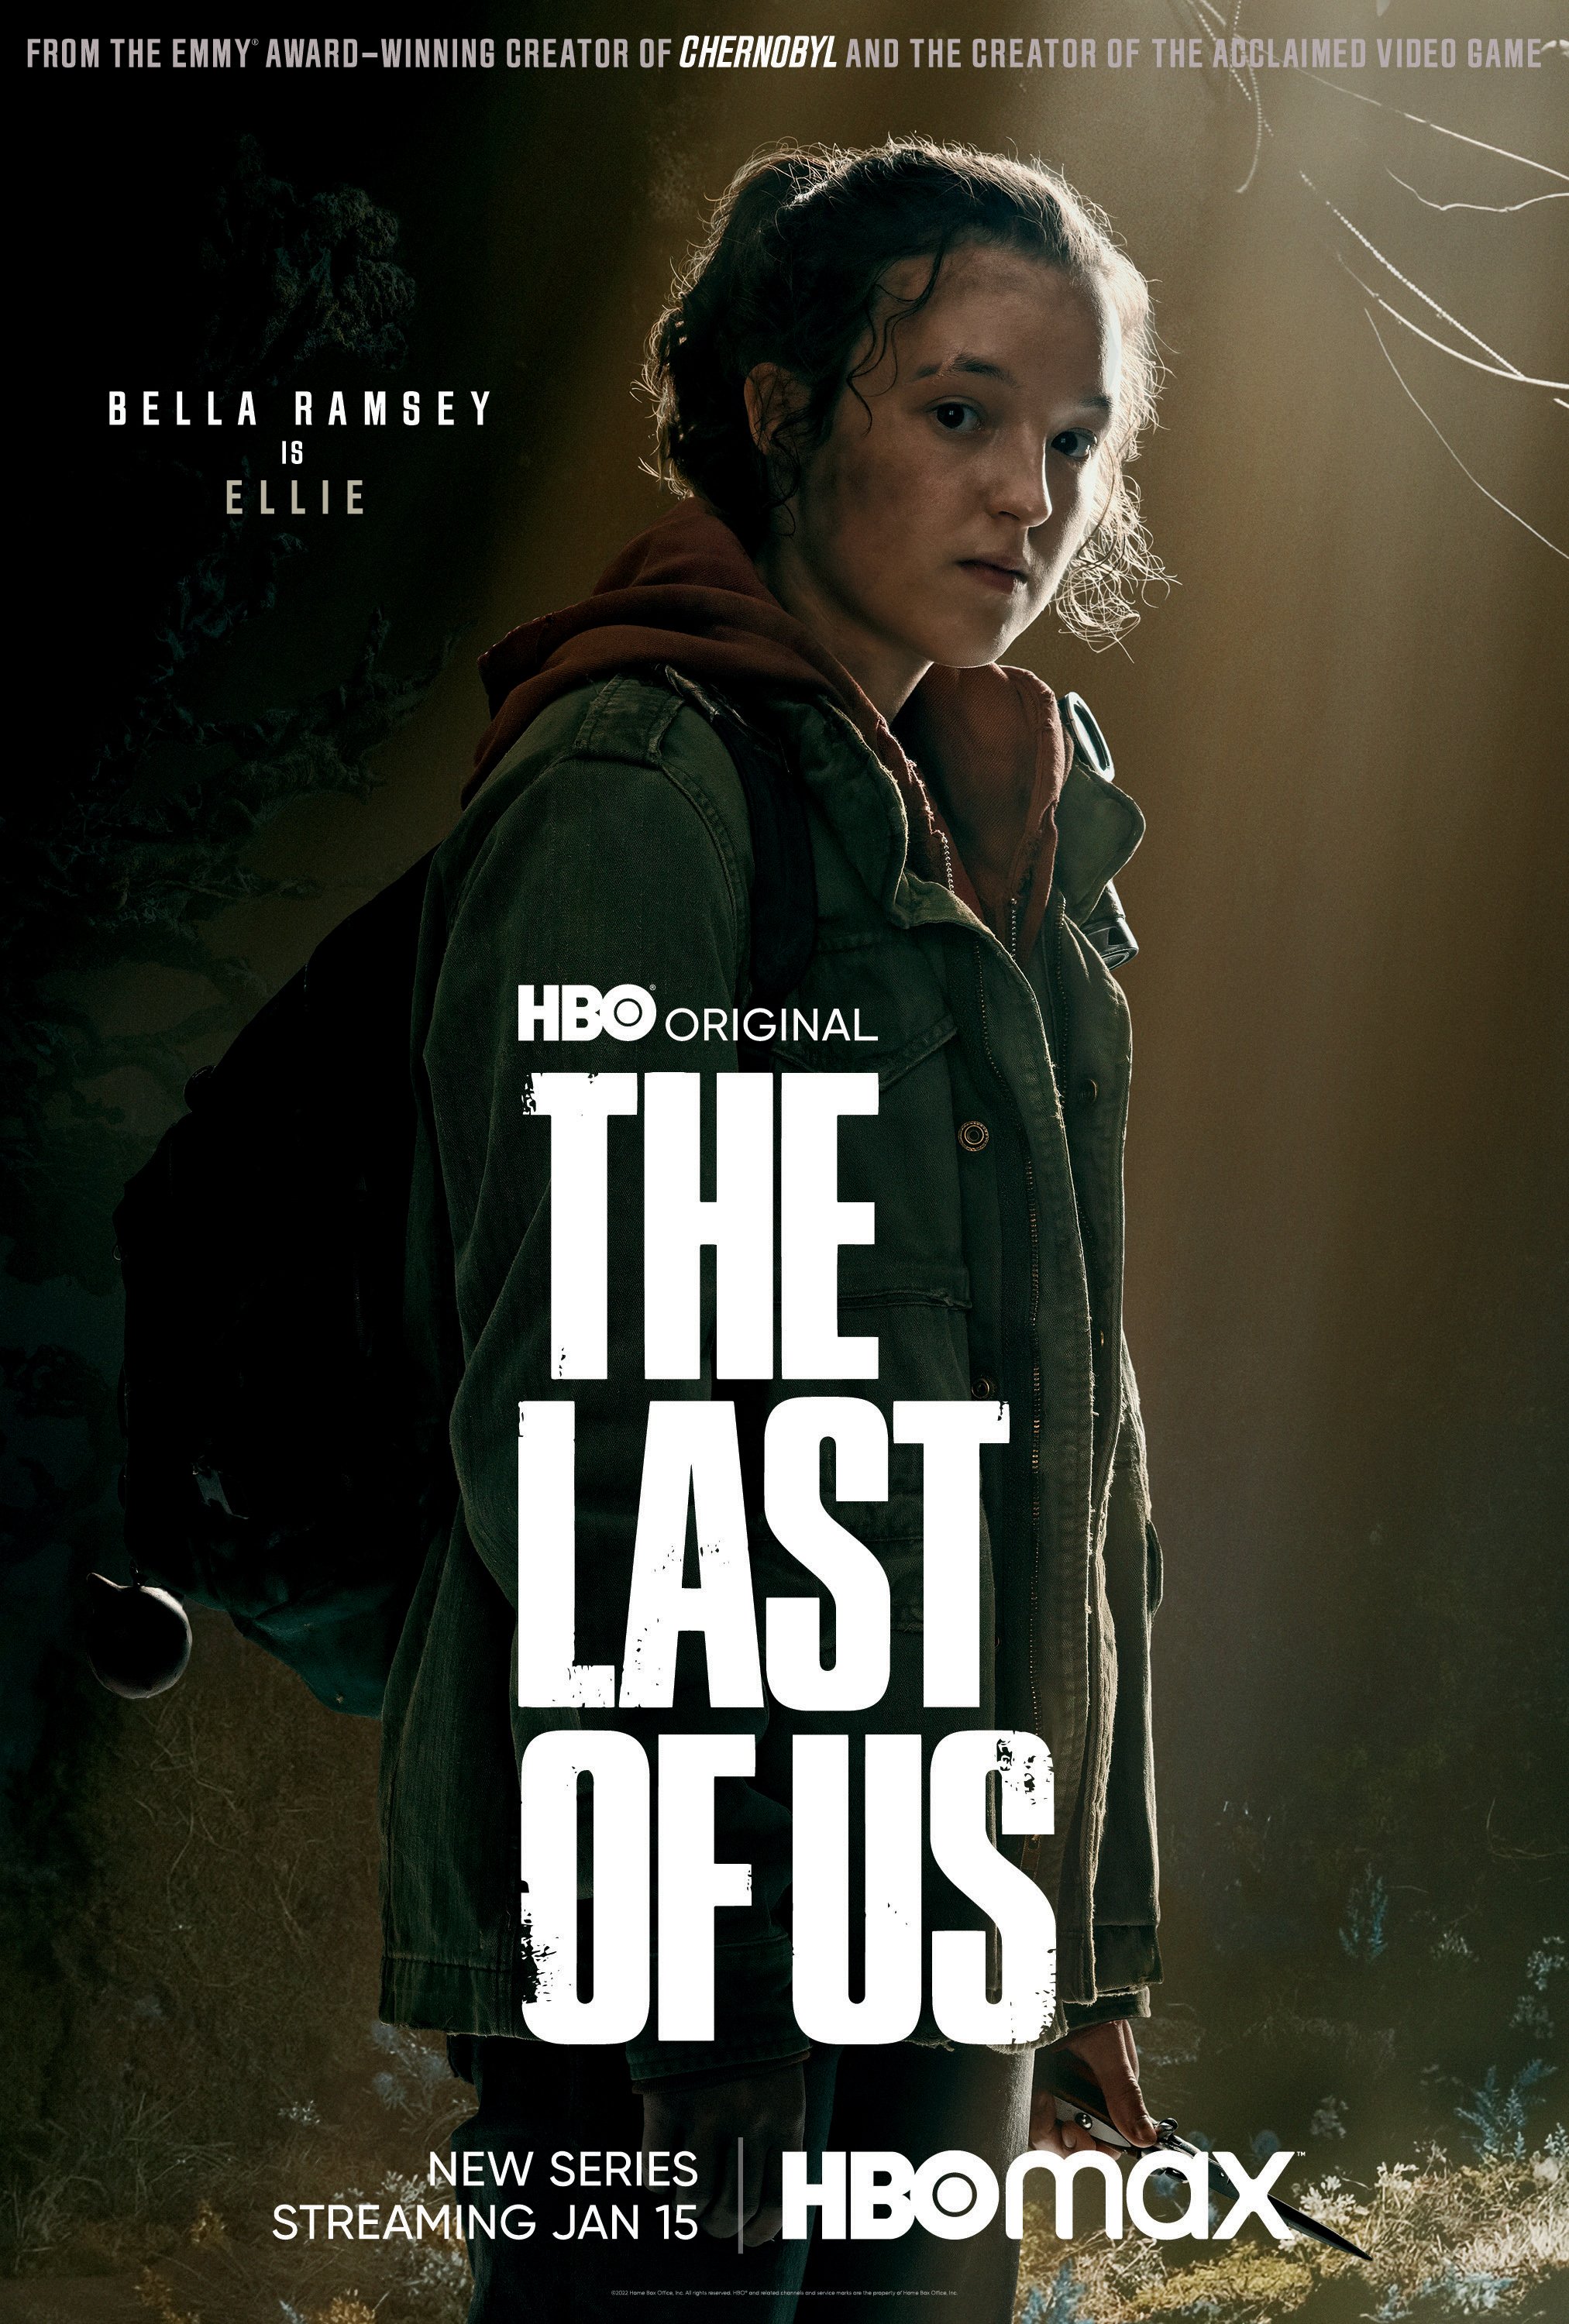 Ashley Johnson On Her The Last of Us Role, The Last of Us